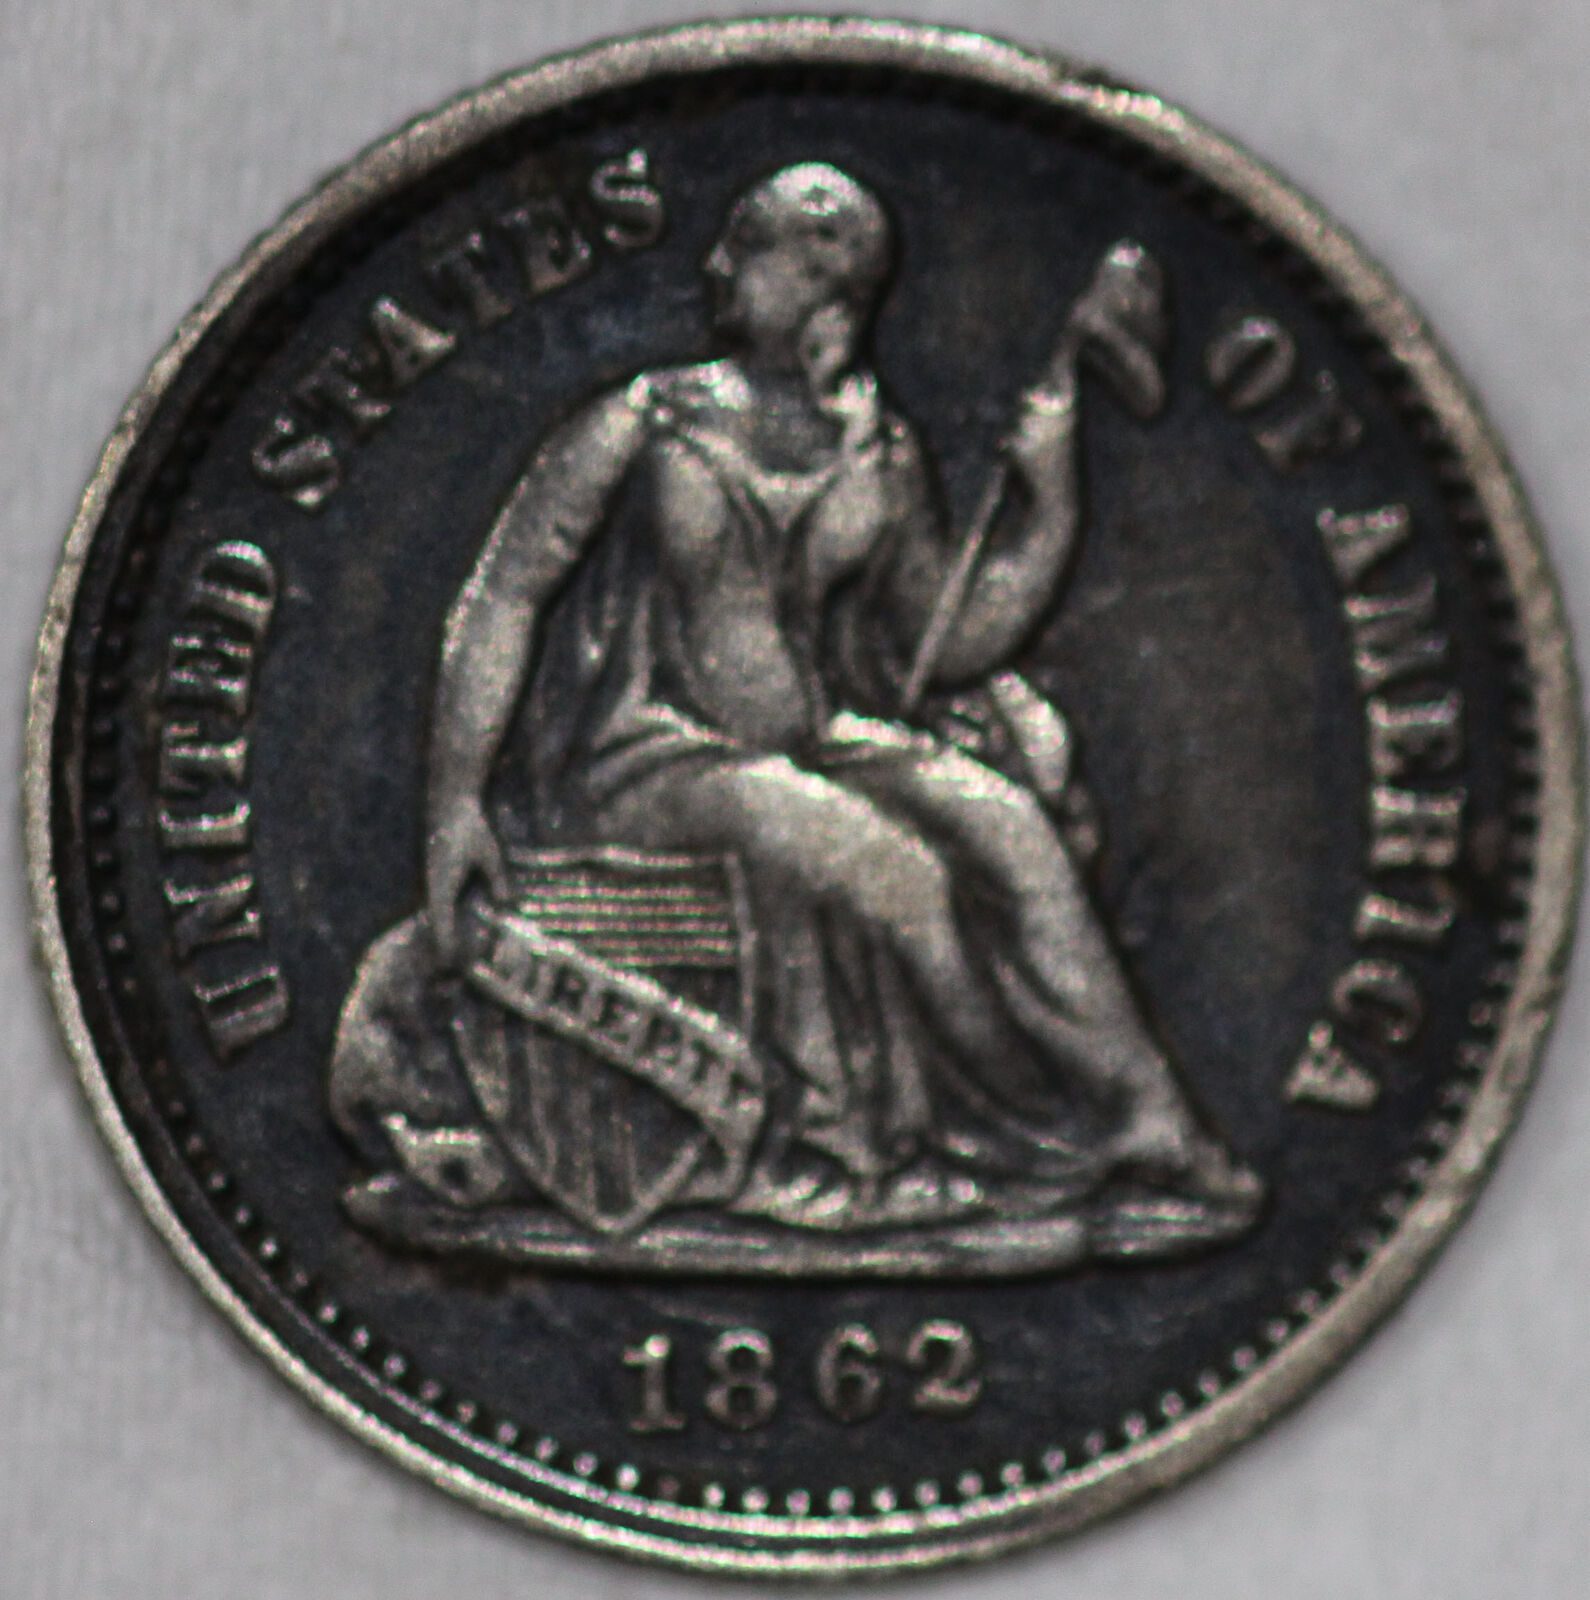 1862-p Seated Liberty Half Dime Impaired Proof, Lightly Circulated As Shown